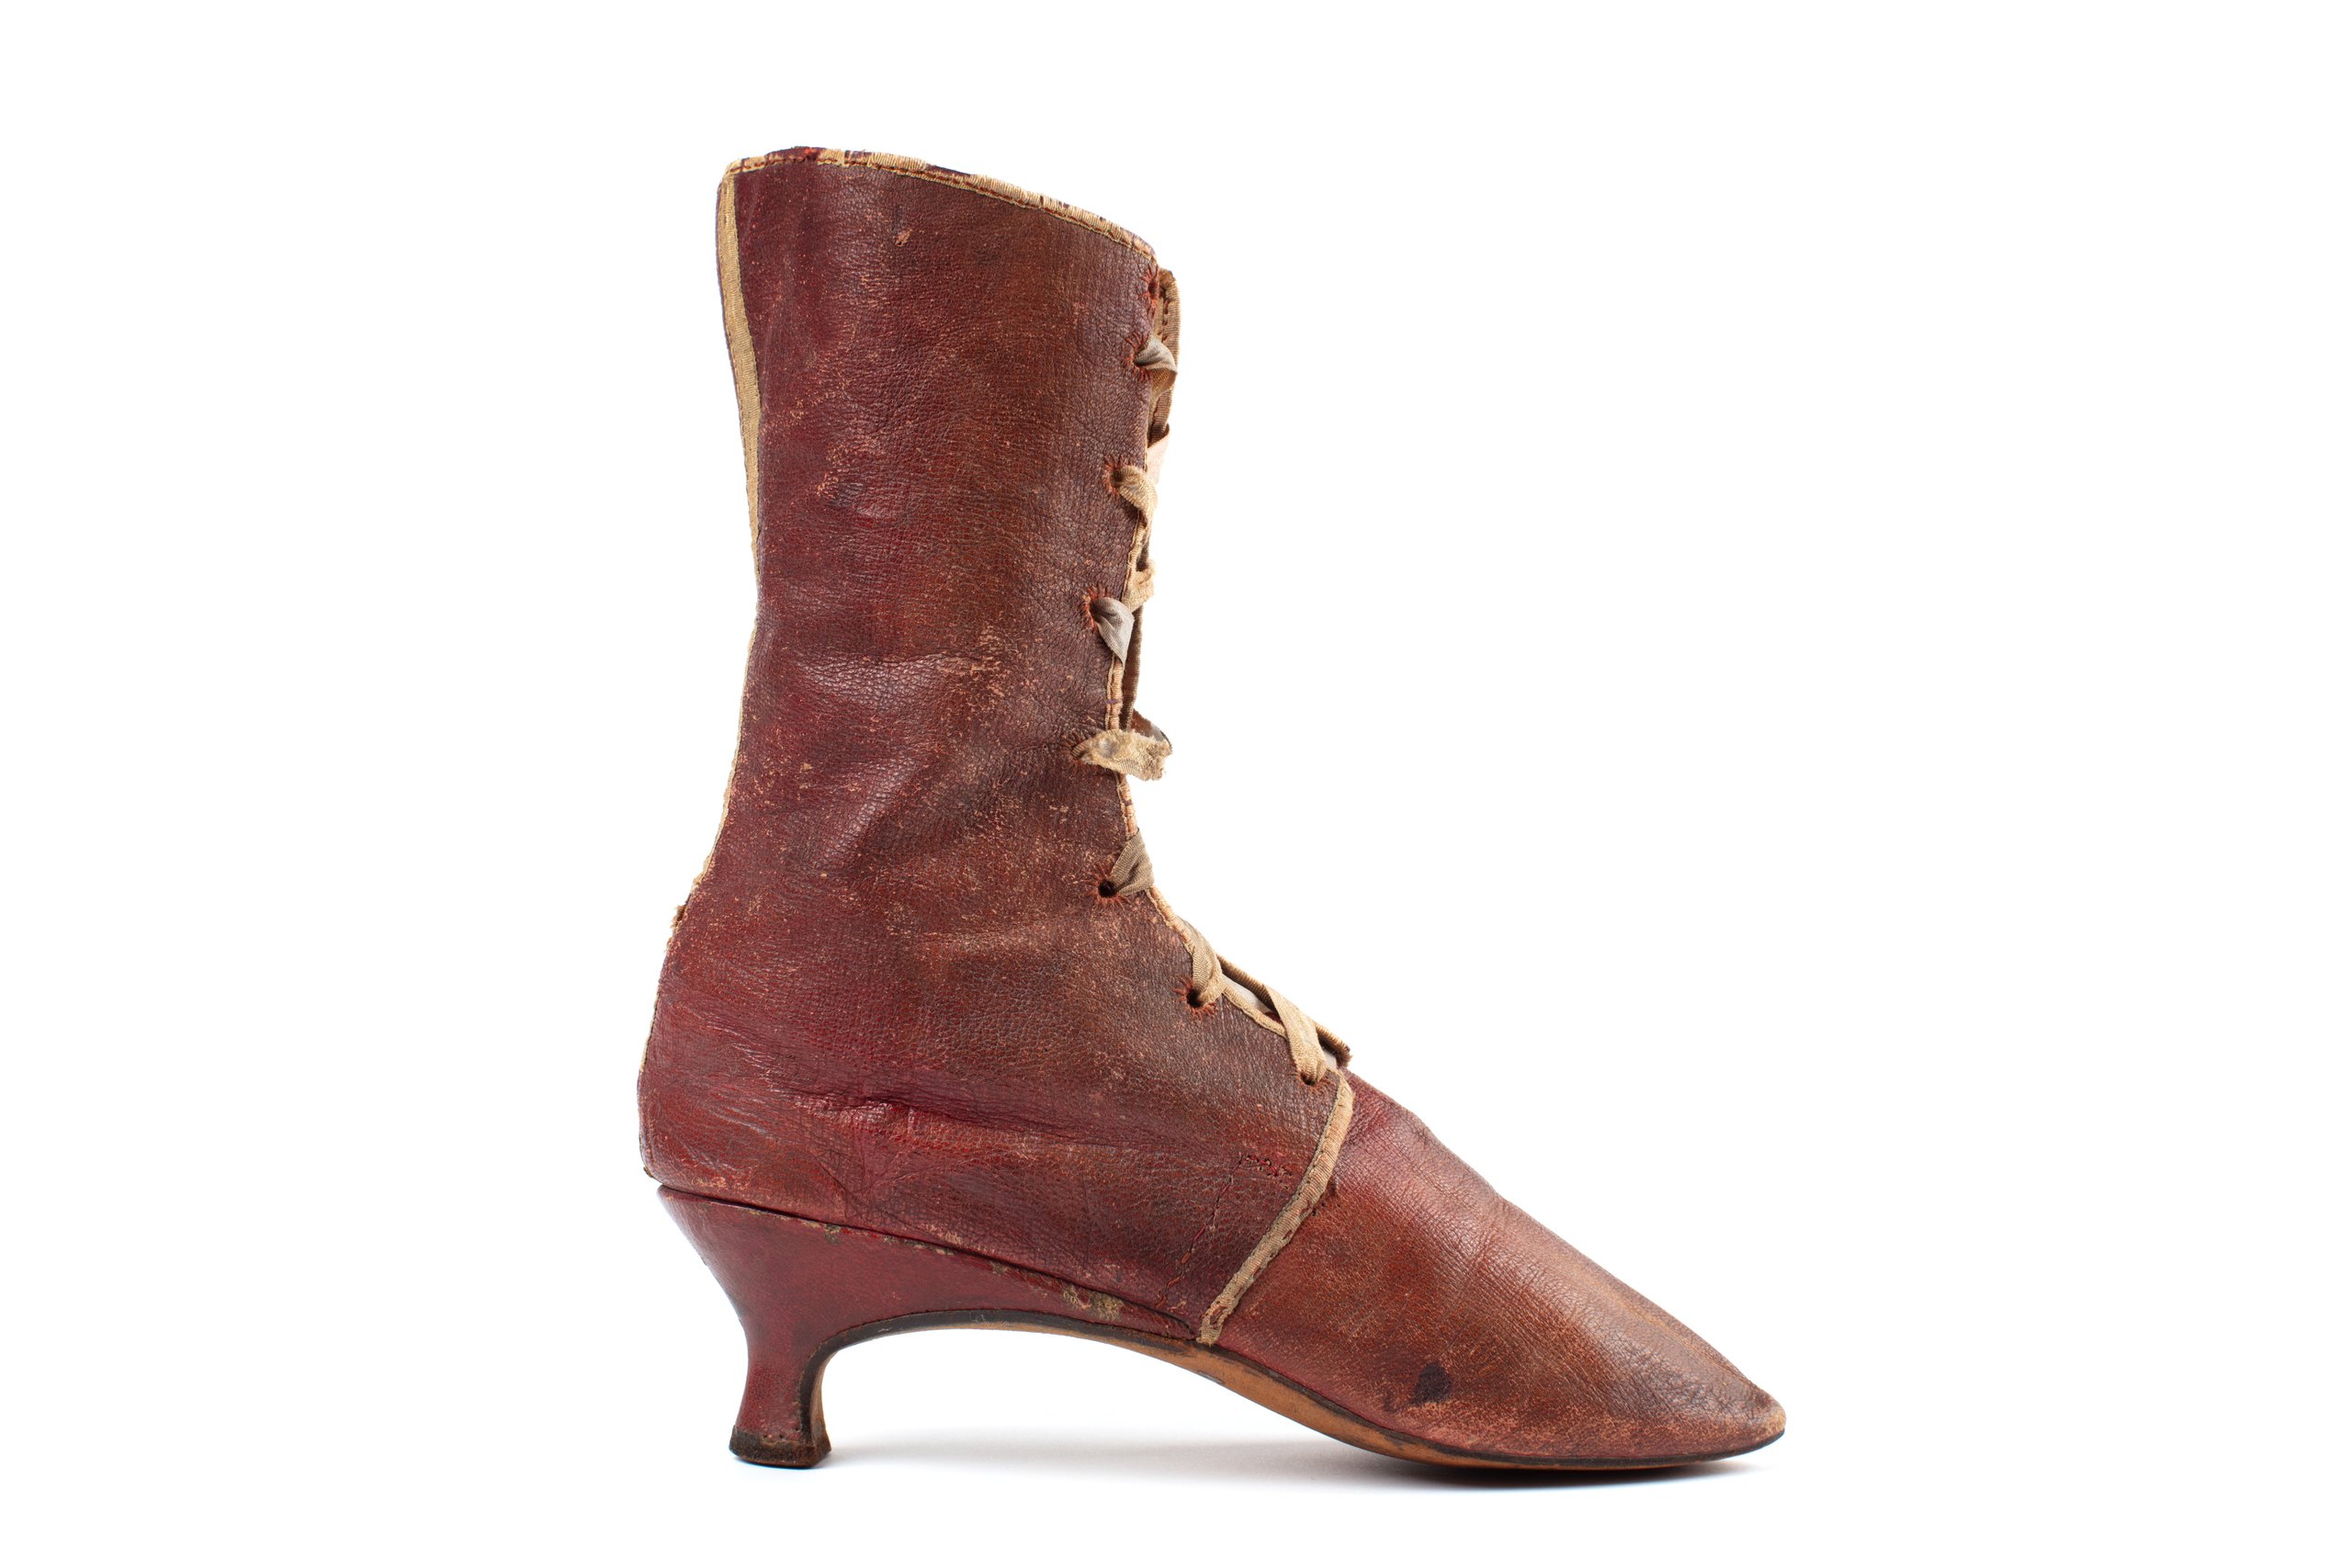 Pair of front laced boots from the Joseph Box collection